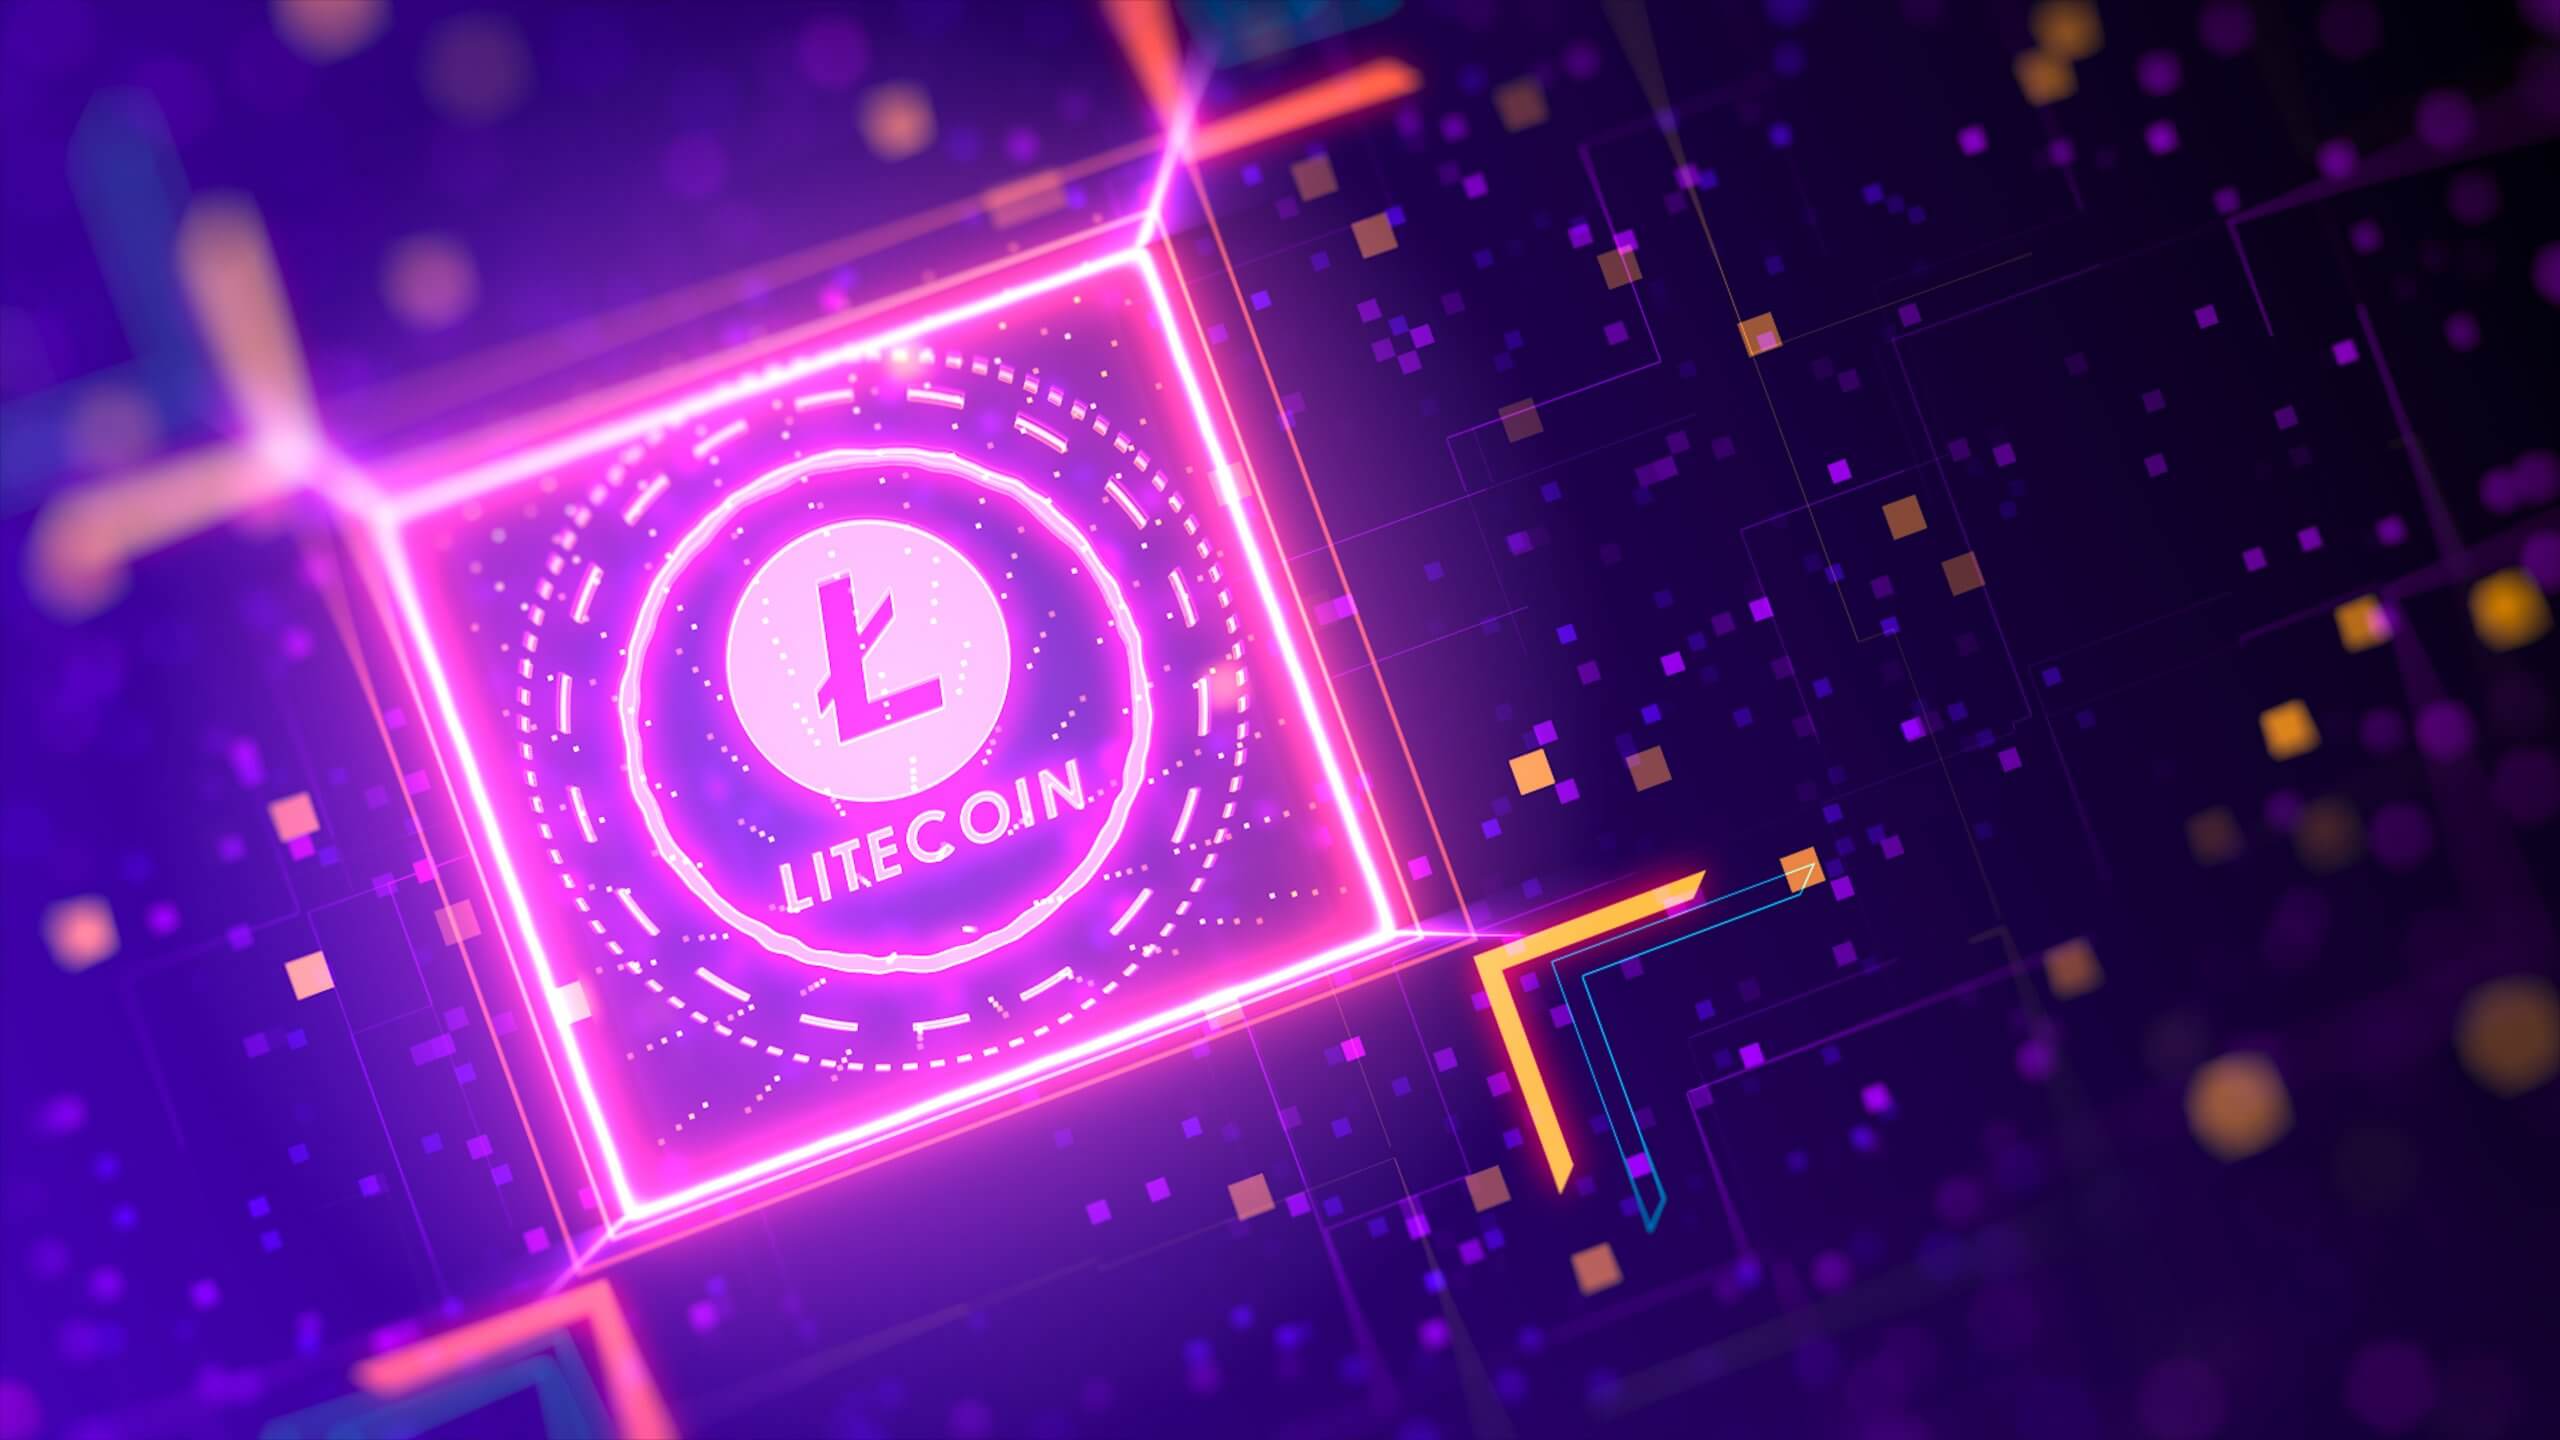 All about Litecoin